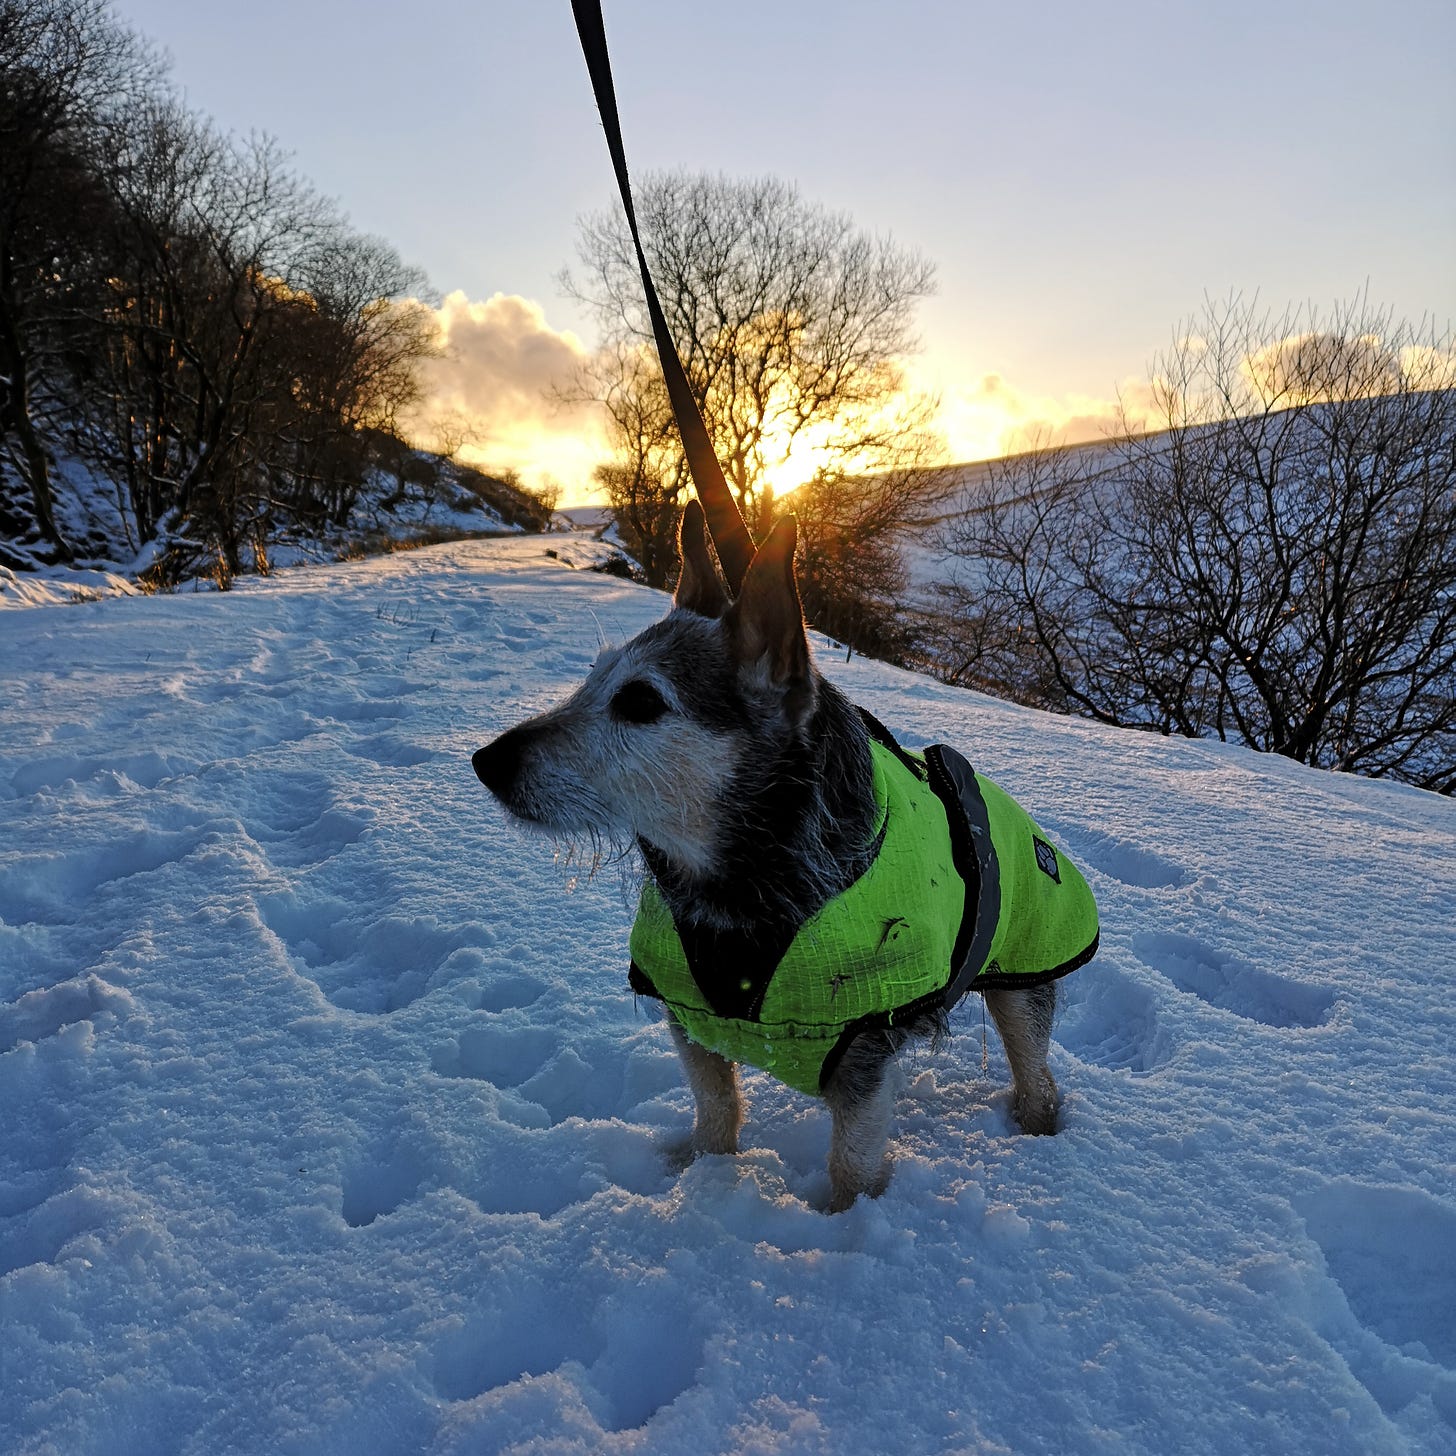 Jack the scruffy terrier is standing in the snow, wearing his neon green jacket. The sun is setting behind him, silhouetting the bare winter trees but casting a beautiful light across the snow covered footpath